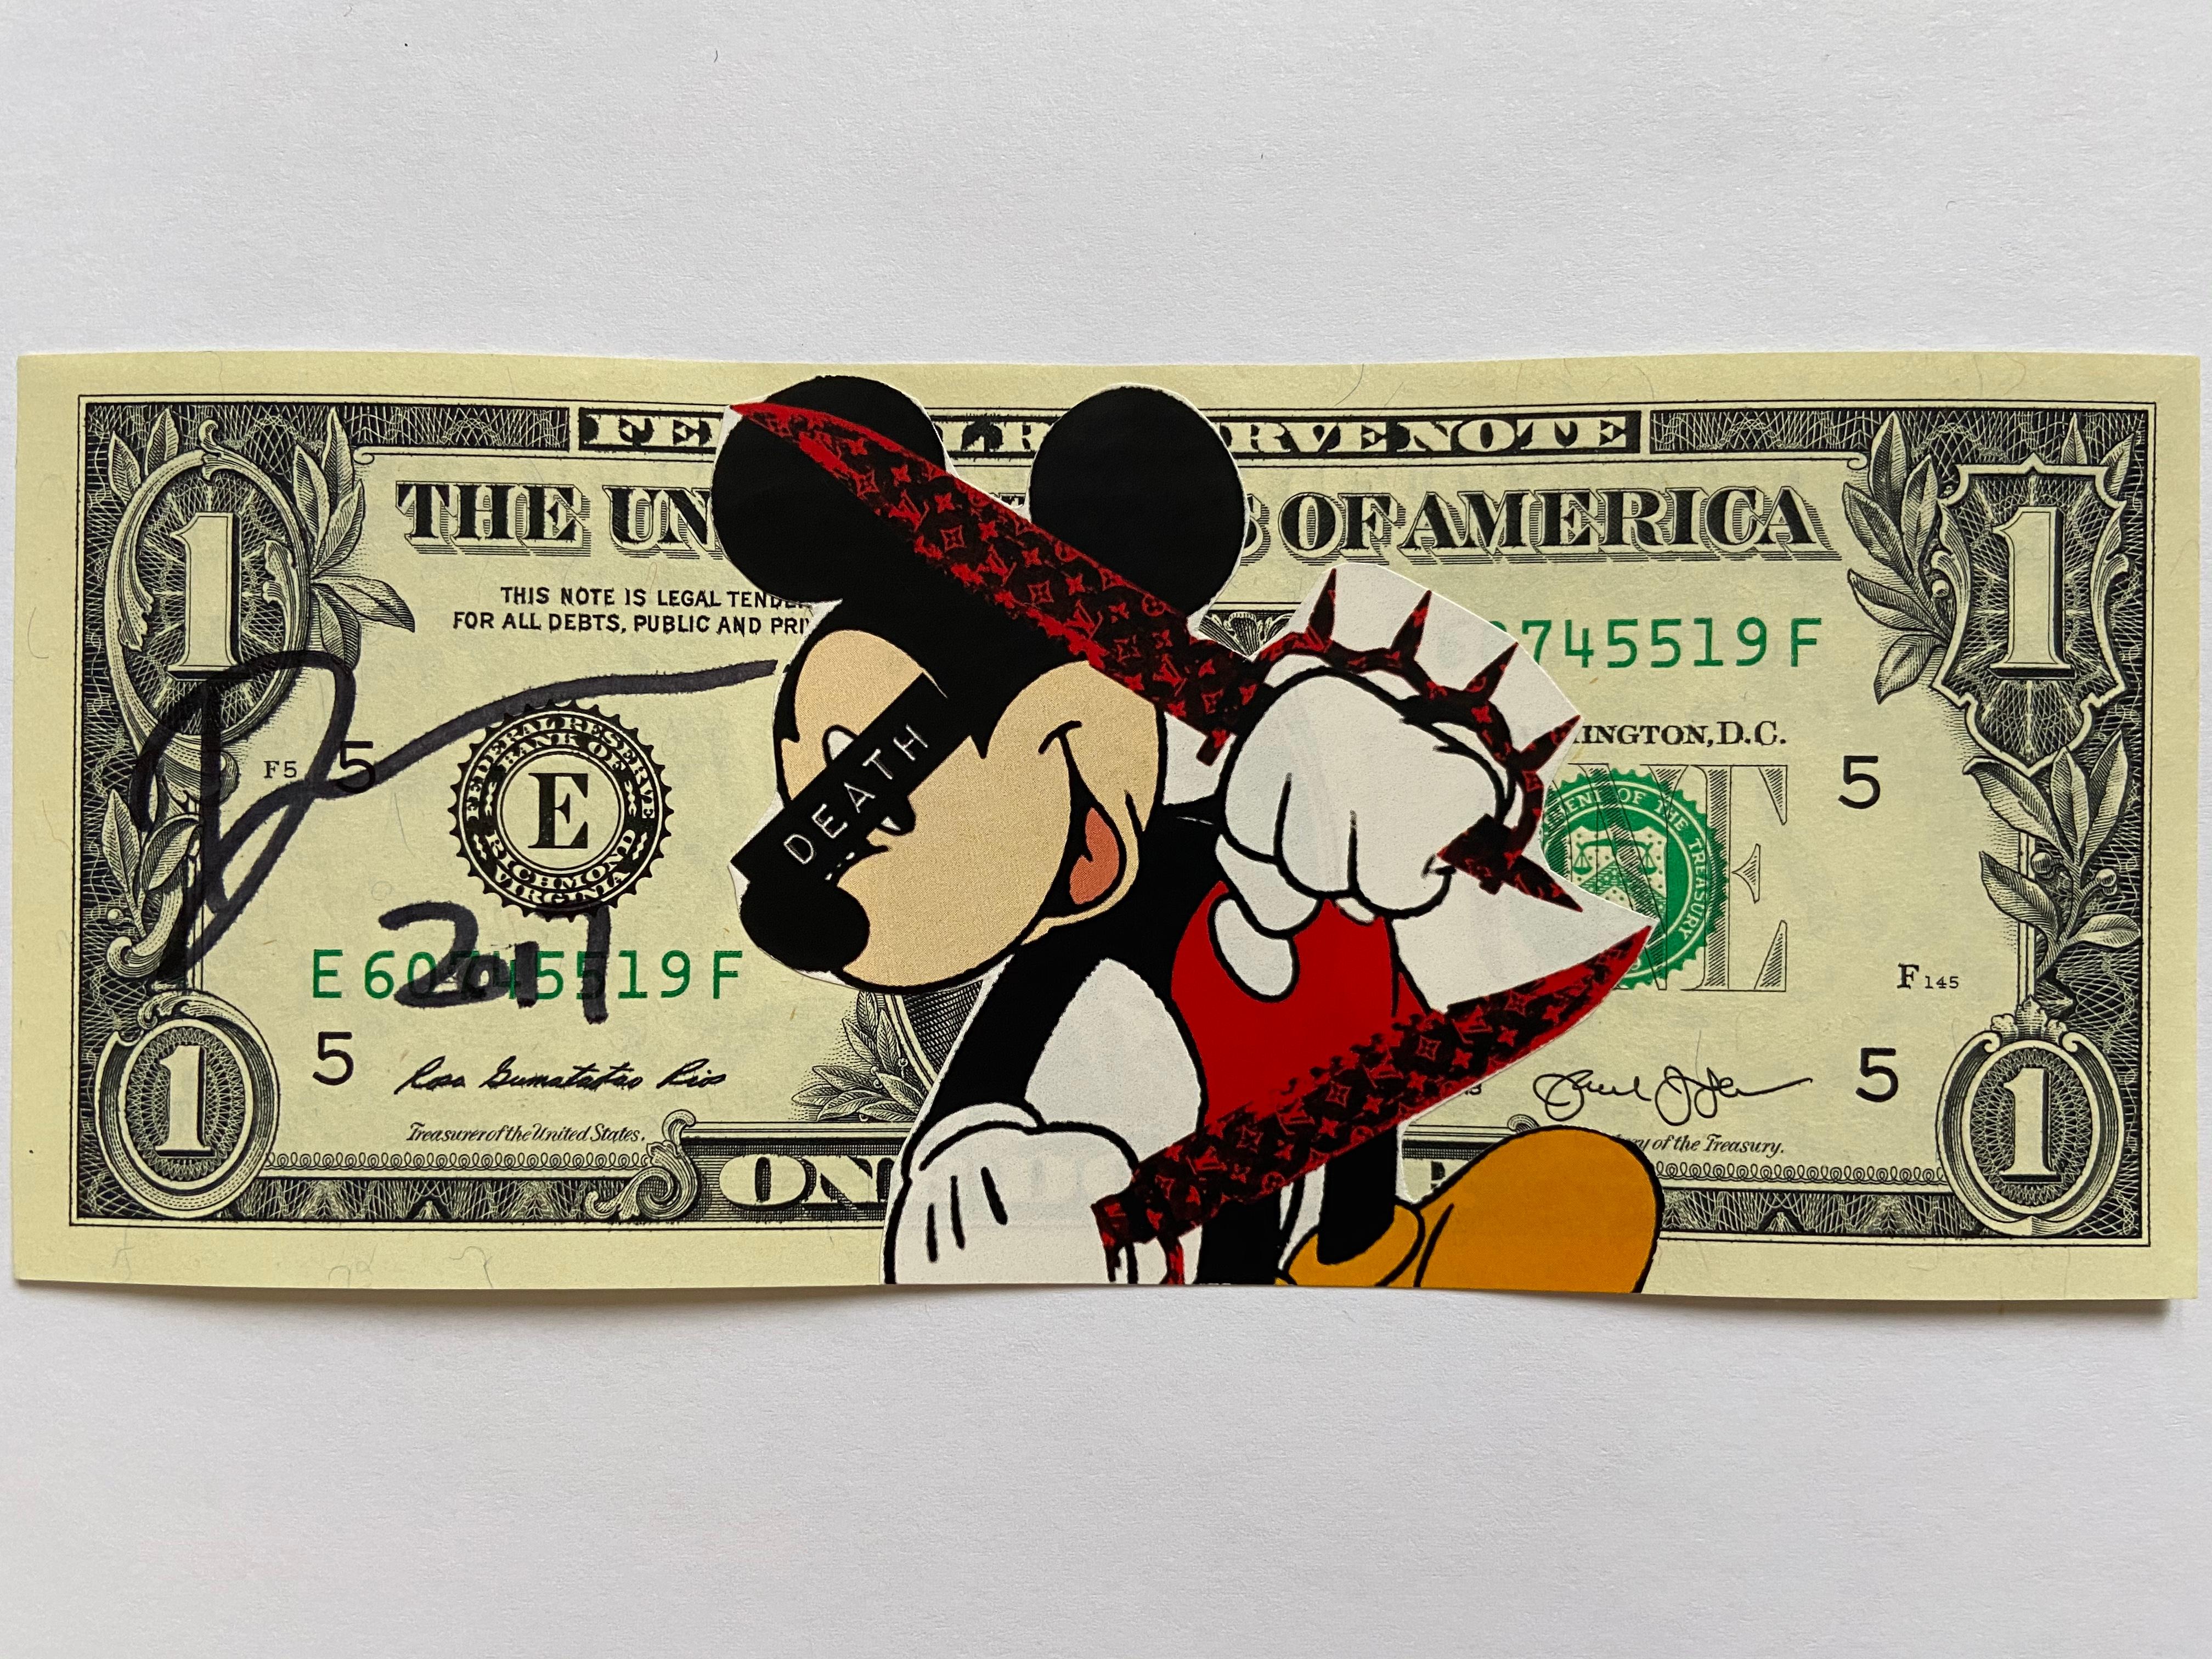 Death NYC
MICKEY KILLER
2017
Gluing on 1 dollar notes
Signed by the artist
Size: 7 x 15.5 cm
Original copy, delivered with certificate of authenticity and stamp of the artist
Perfect condition 
99 euros 